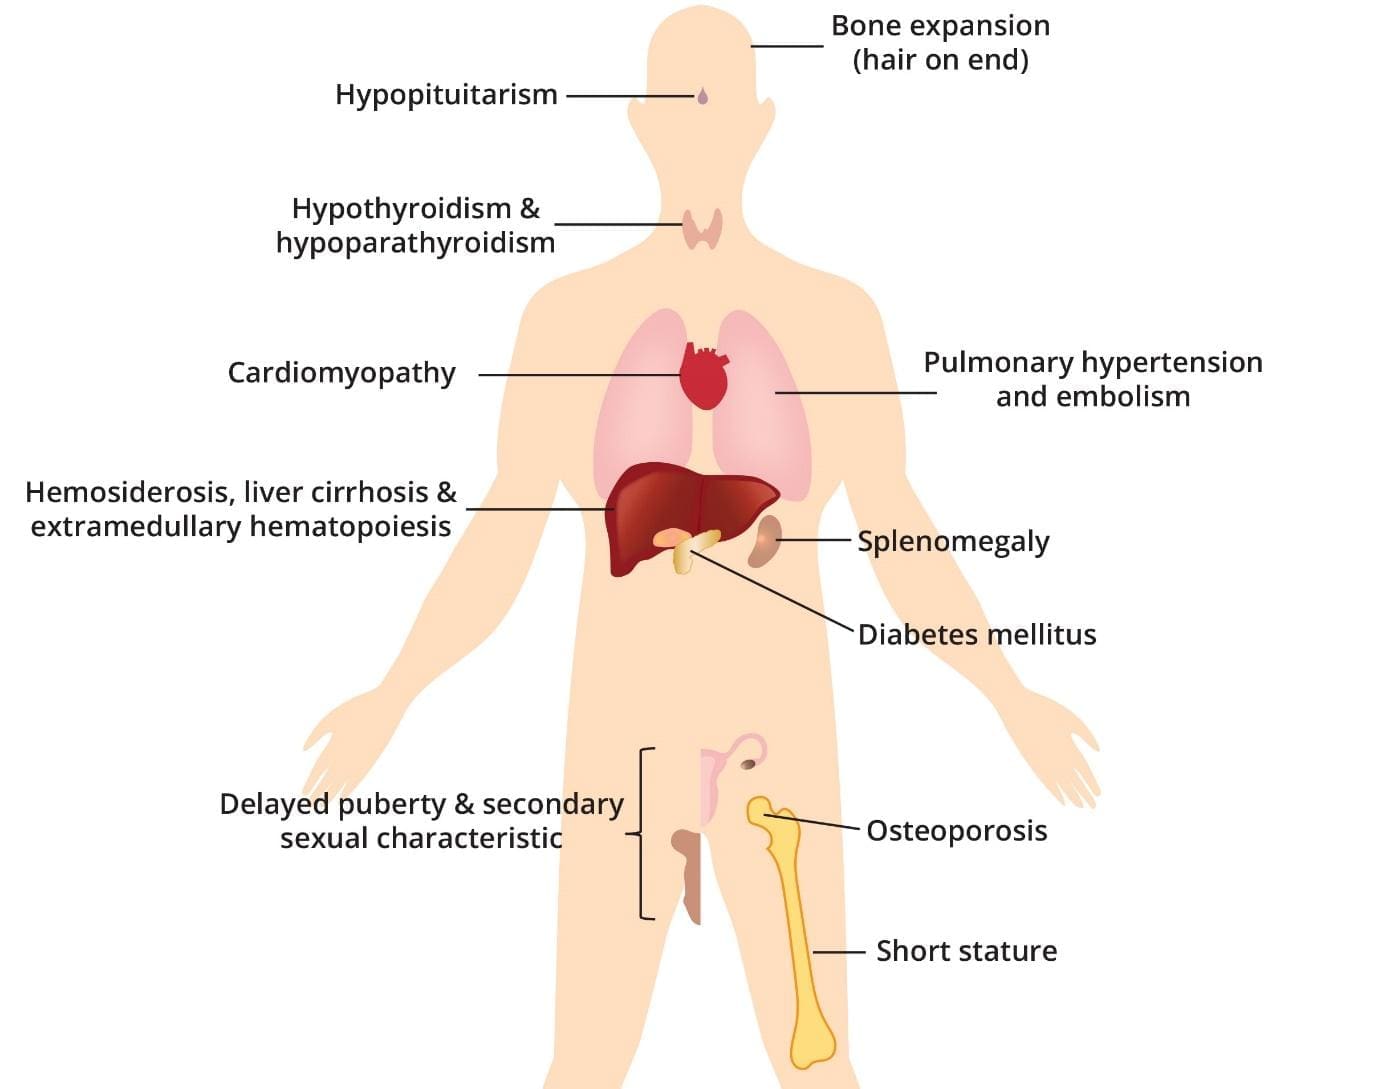 Image depicting the organ damage caused by beta-thalassemia major, highlighting the impact of iron overload on various organs